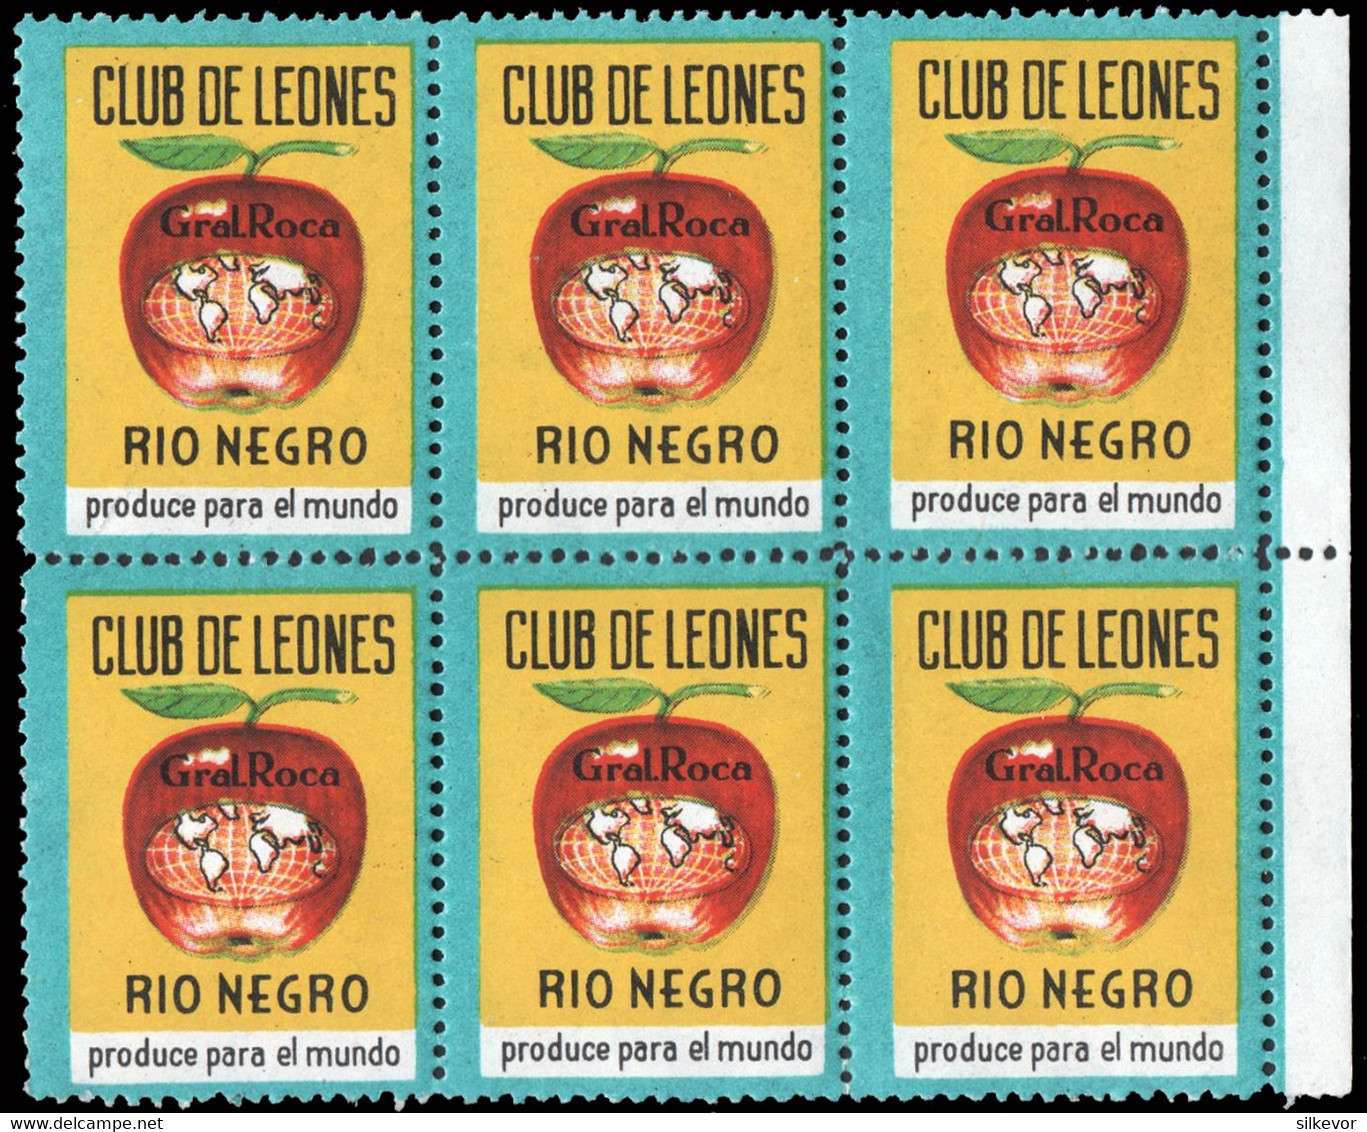 LIONS CLUB-STAMPS-ARGENTINA-CINDERELLA ISSUED IN  1964 BY GENERAL ROCA LIONS CLUB( RIO NEGRO PROVINCE) - Frankeervignetten (Frama)